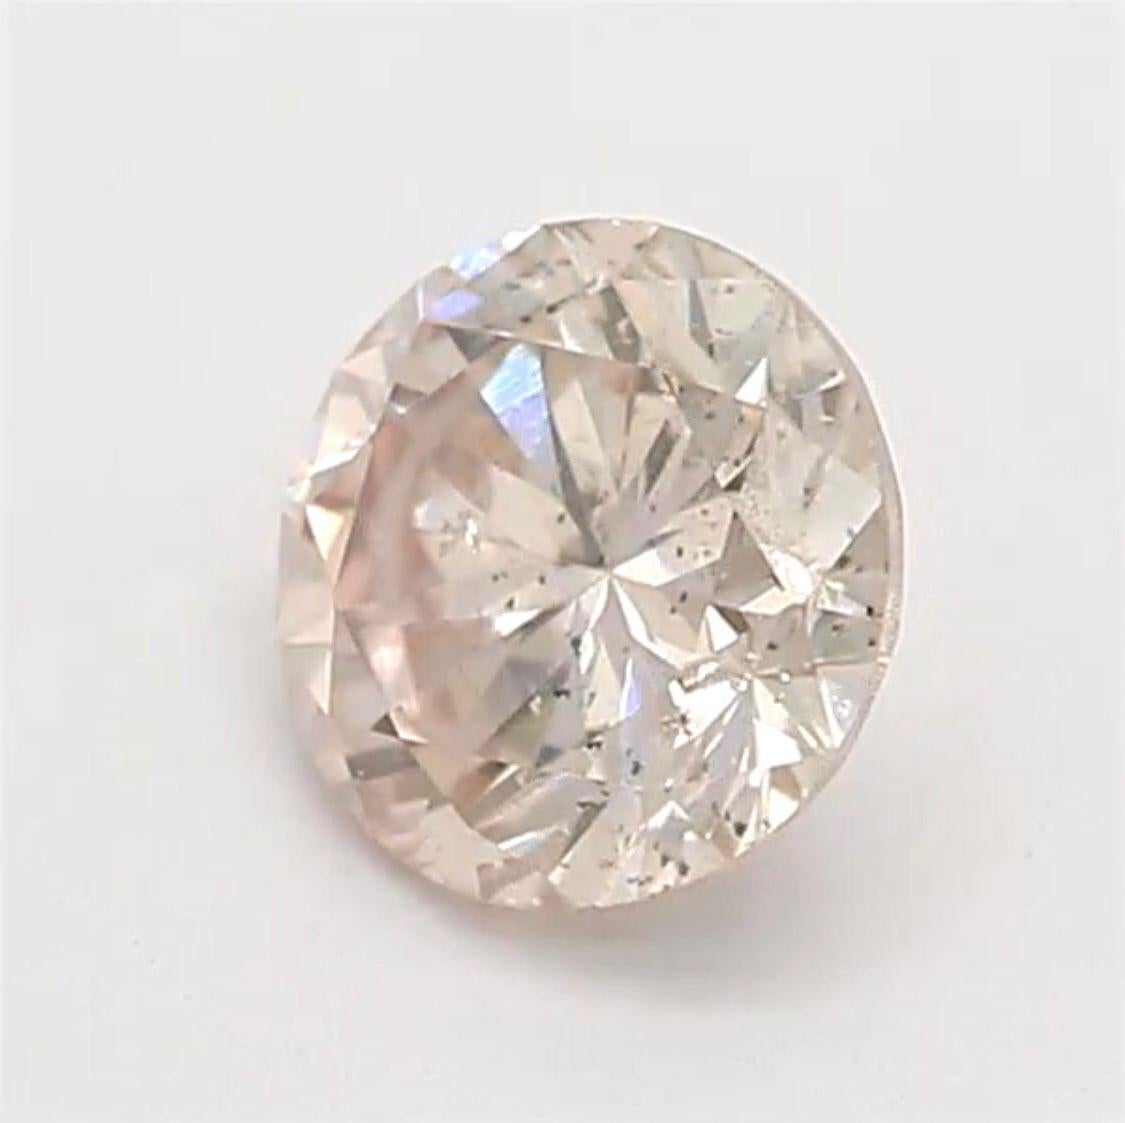 0.28 Carat Light Orangy Pink Round Shaped Diamond SI2 Clarity CGL Certified For Sale 1